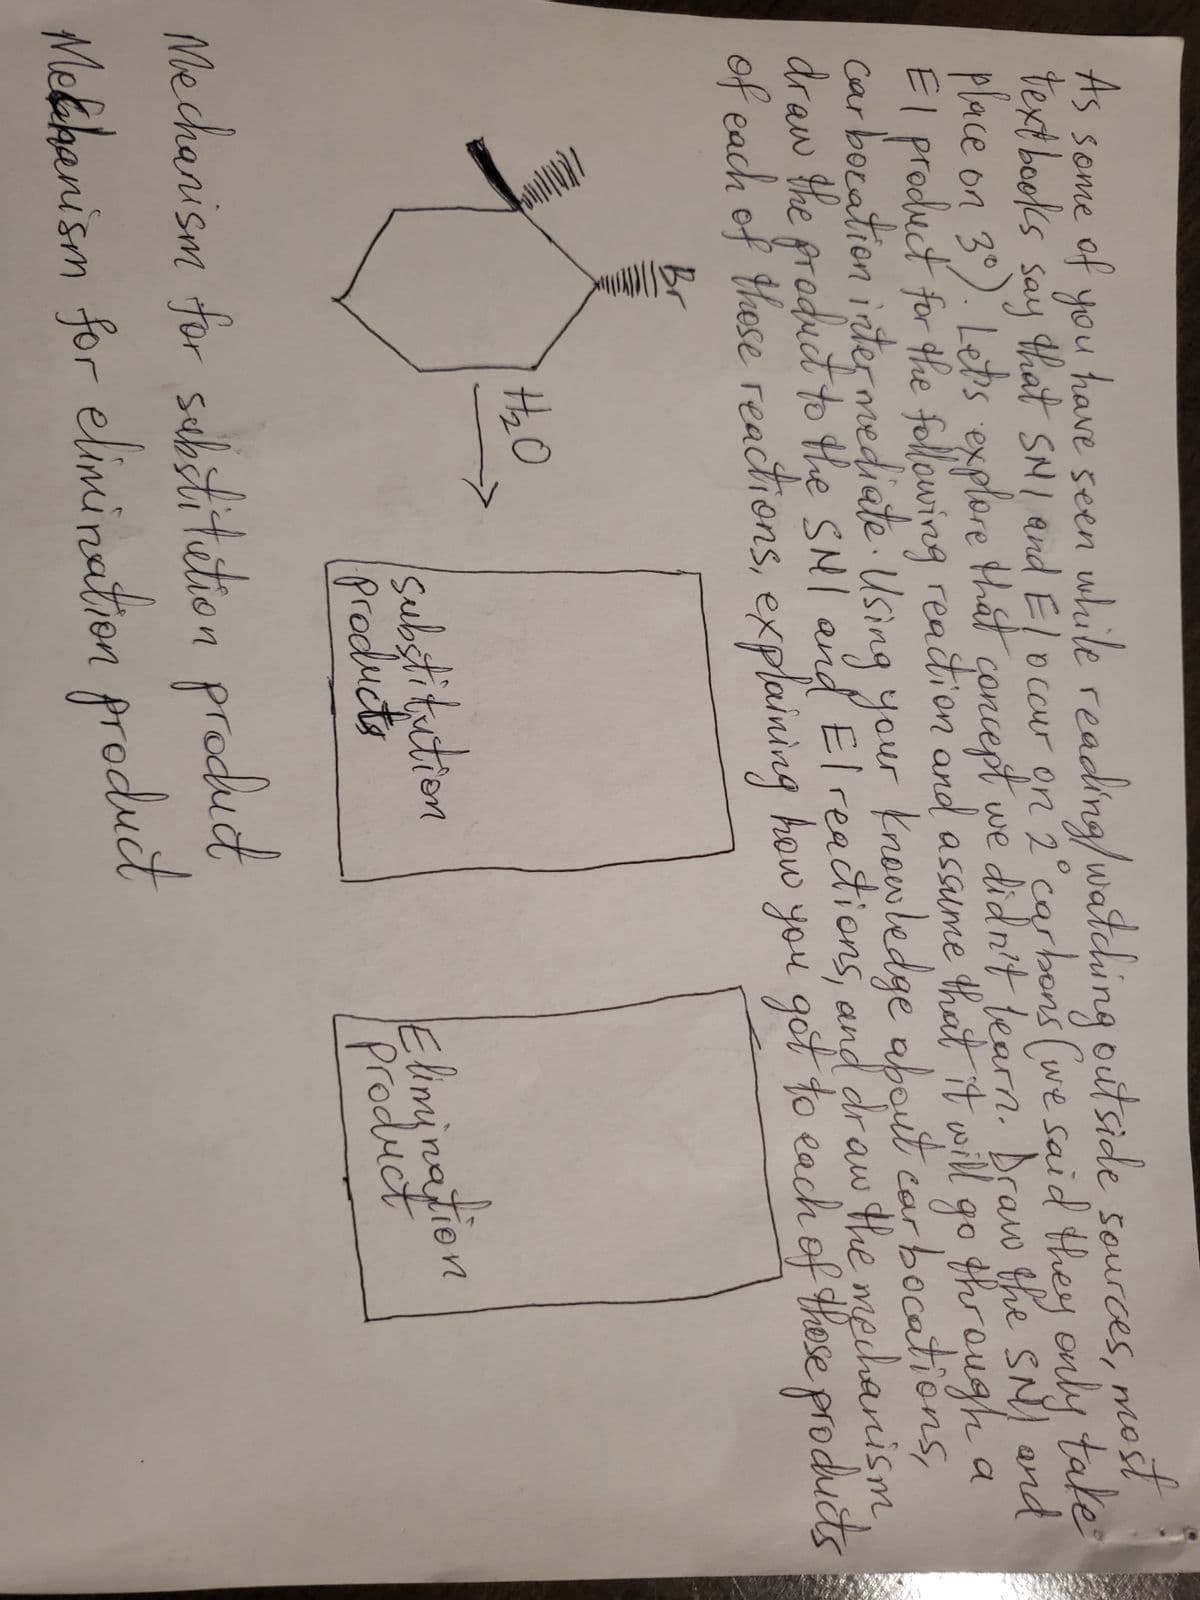 As some of you
textbooks
say
most
have seen while reading/ watching outside sources,
that SMI and El occur on 2° carbons (we said they only take
place on 3°). Let's explore that concept we didn't learn. Draw the SNY and
El product for the following reaction and assume that it will go through a
car bocation intermediate. Using your knowledge about car bocations,
draw the product to the SMI and El reactions, and draw the mechanism
of each of these reactions, explaining how you got to each of these products
Lenna
12₂0
substitution
Products
Mechanism for substitution product
Mechanism for elimination product
Elimination
Product